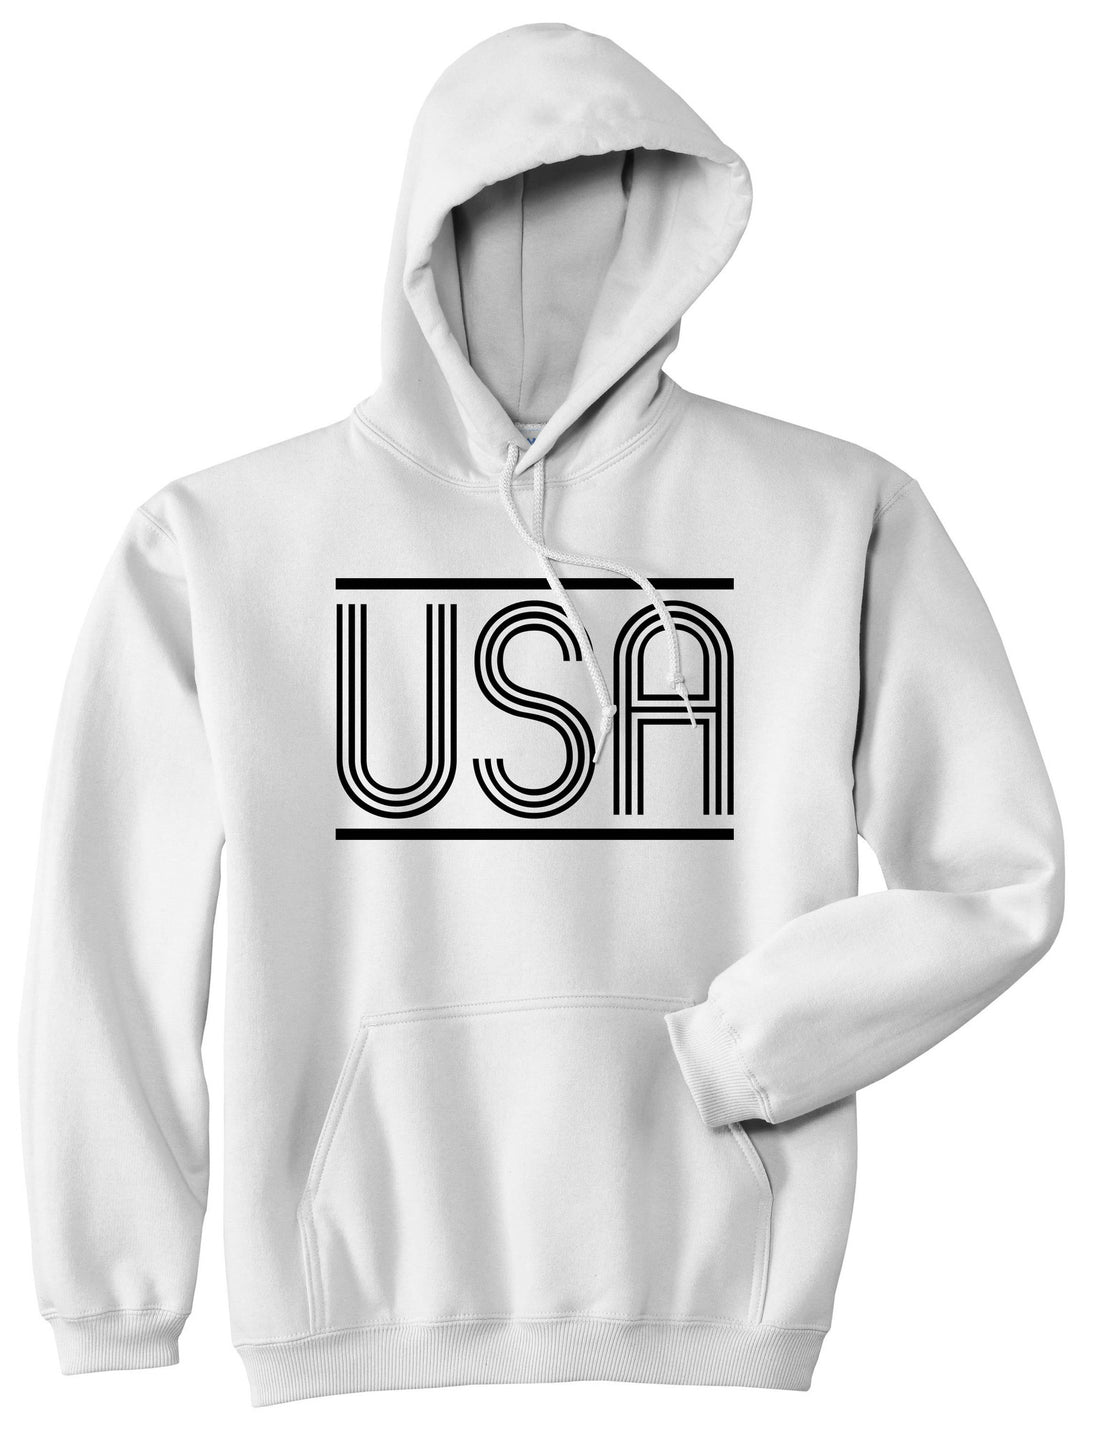 USA America Fall15 Pullover Hoodie Hoody in White by Kings Of NY